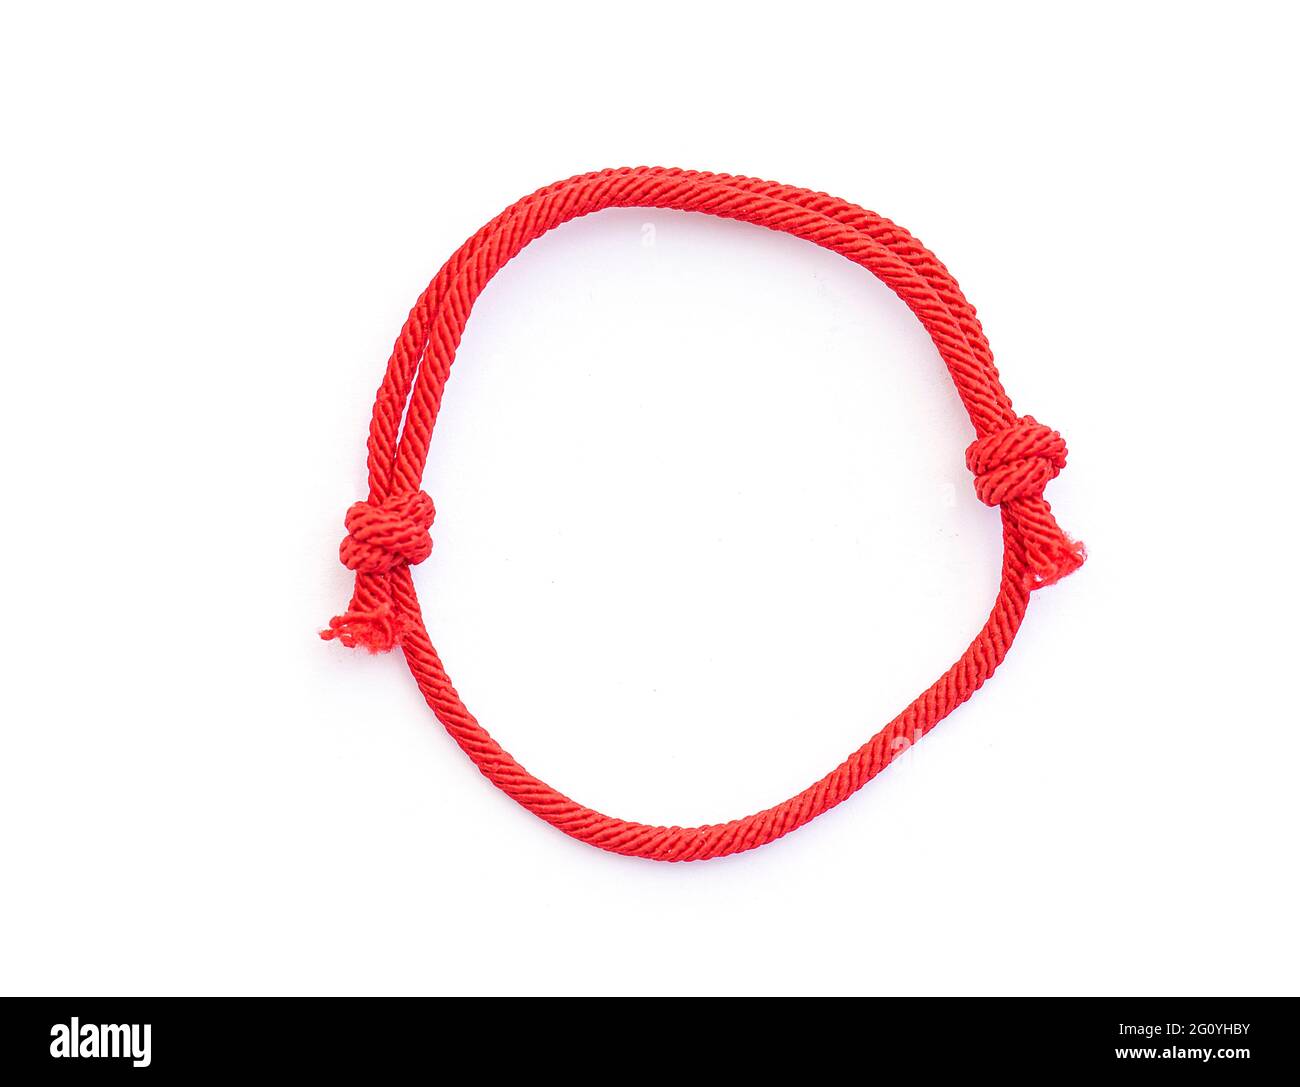 Red thread, string as amulet for wrist isolated on white. Red bracelet with knots. Top view. Stock Photo